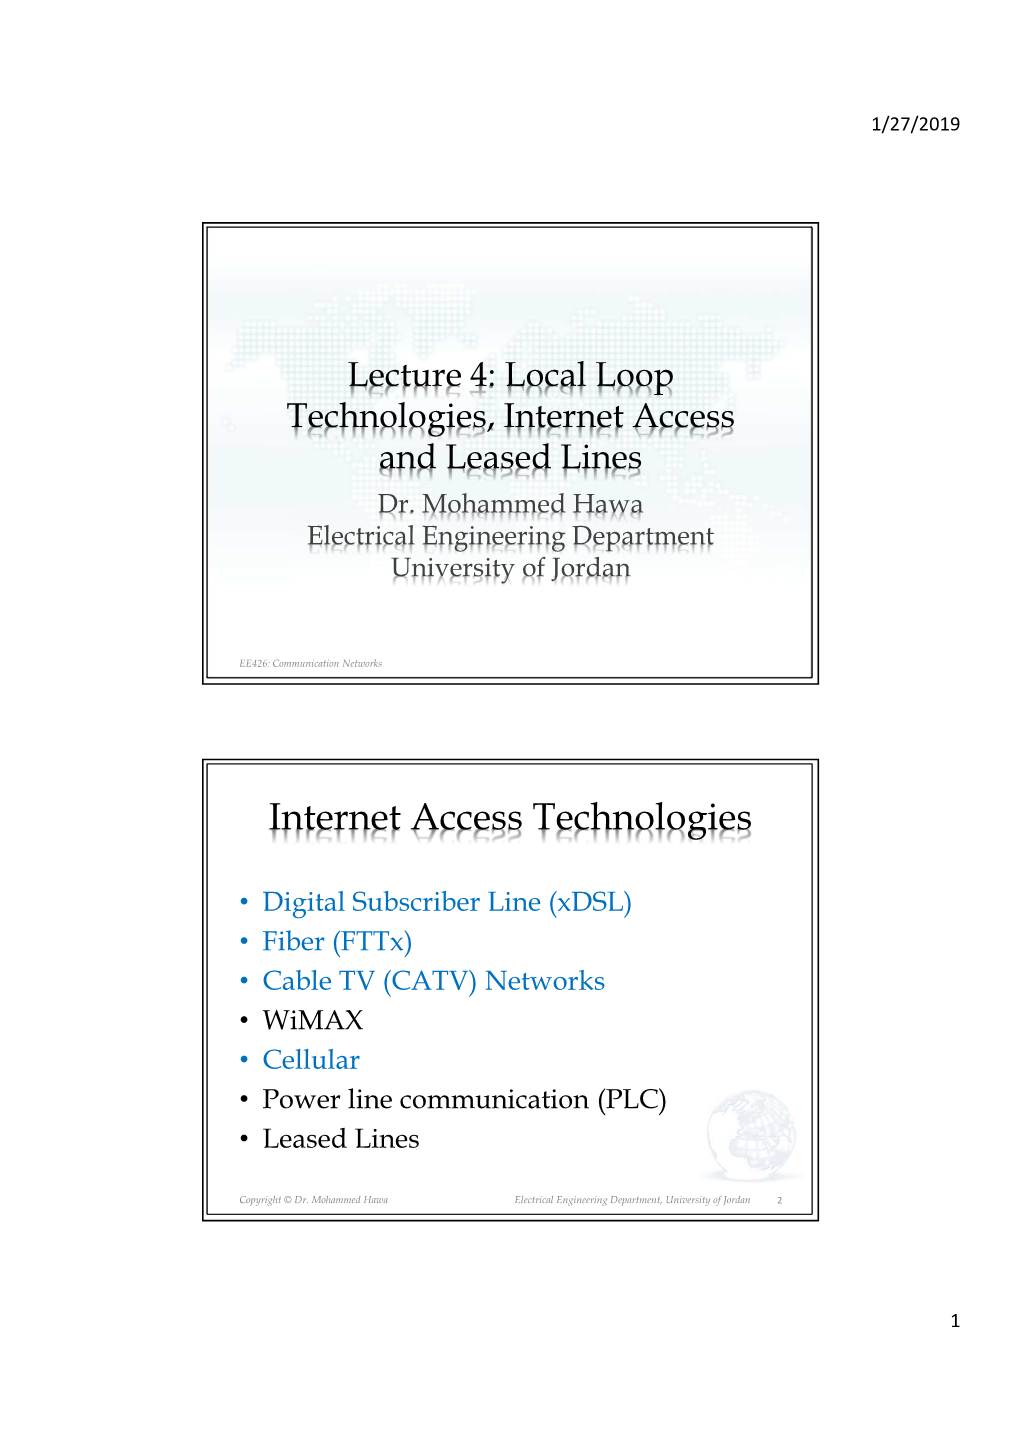 Local Loop Technologies, Internet Access and Leased Lines Dr